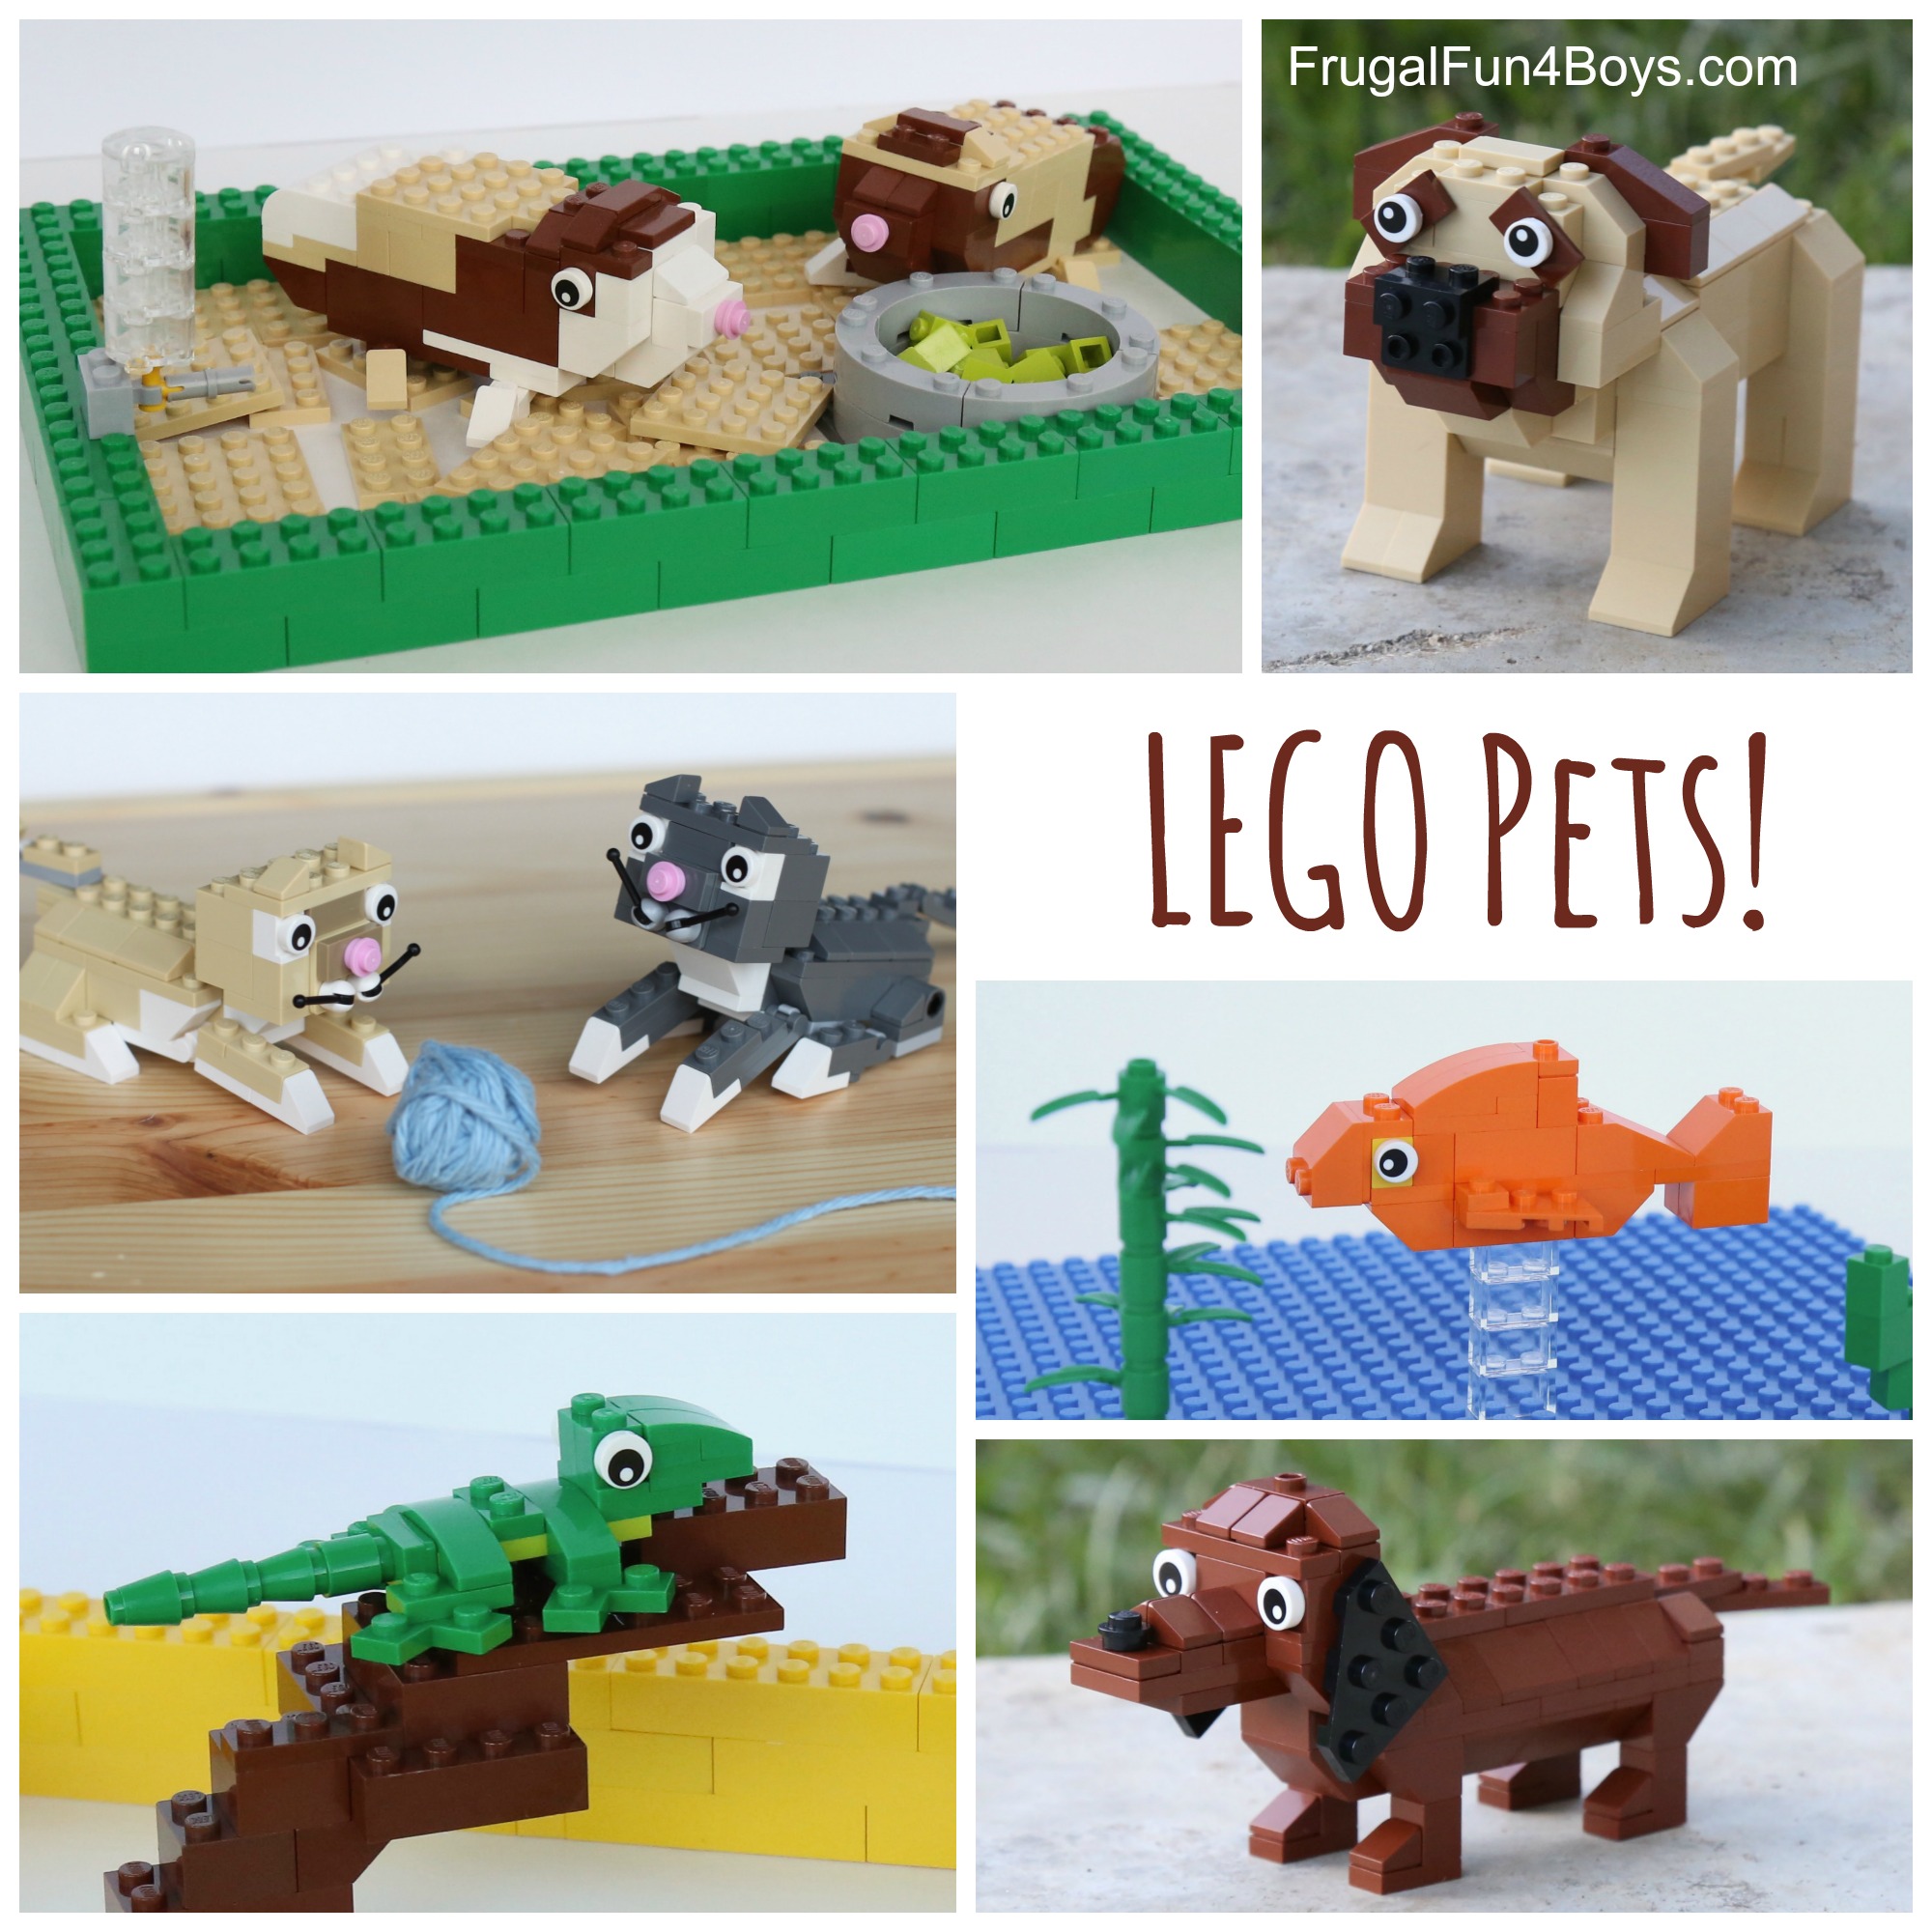 LEGO Pets Building Instructions! Build dogs, cats, guinea pigs, and more!